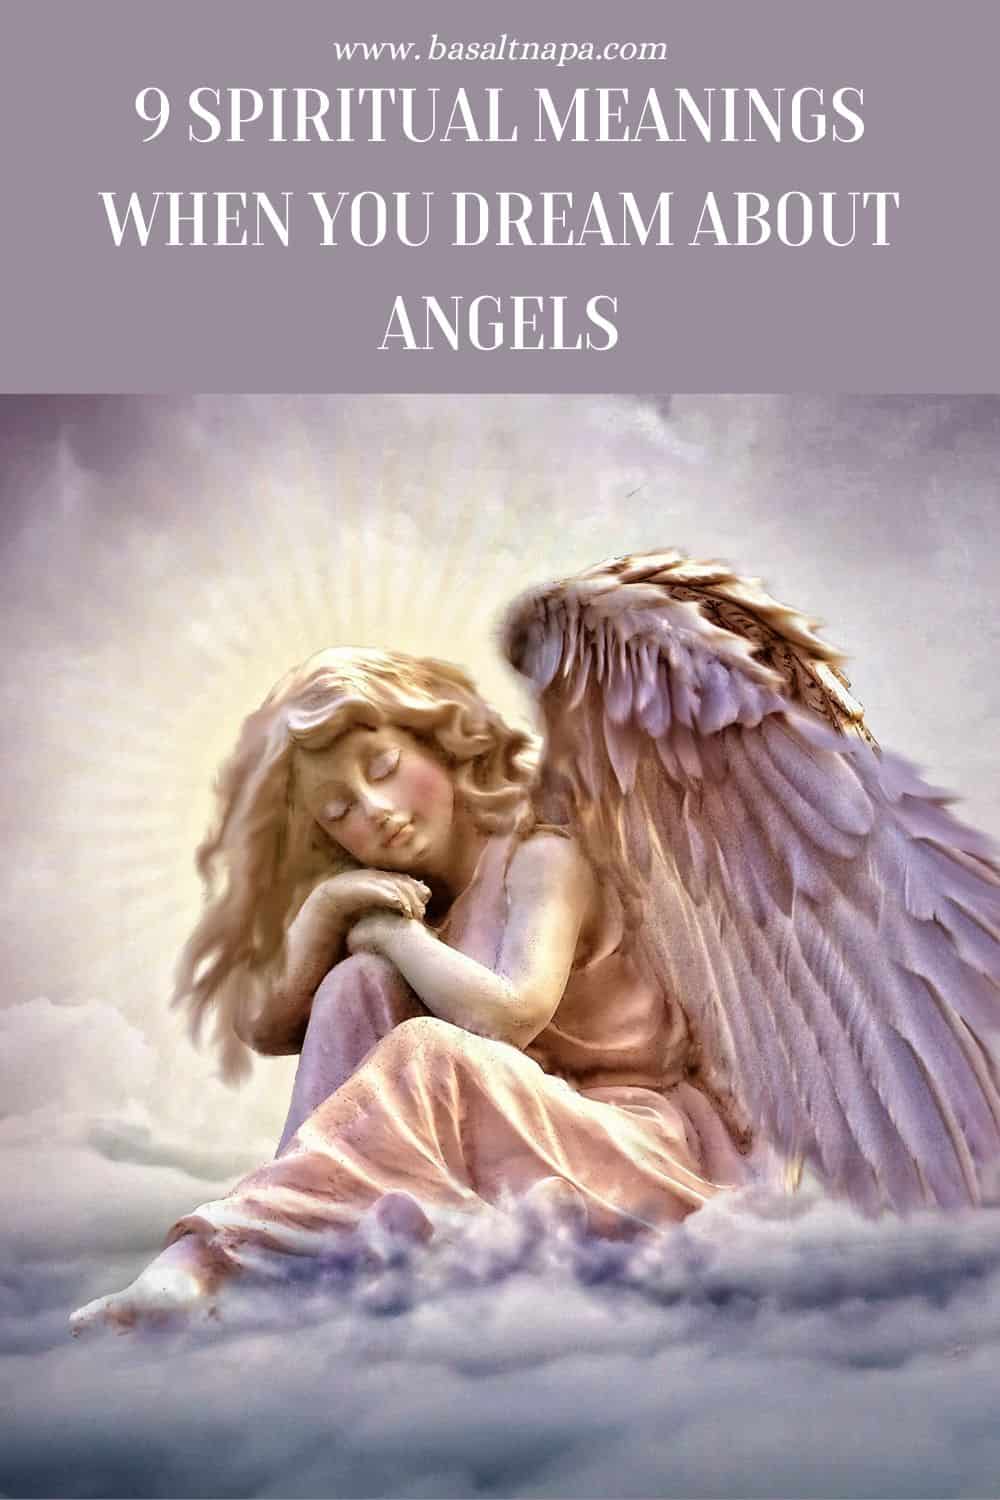 What Does It Mean When You Dream About Angels?